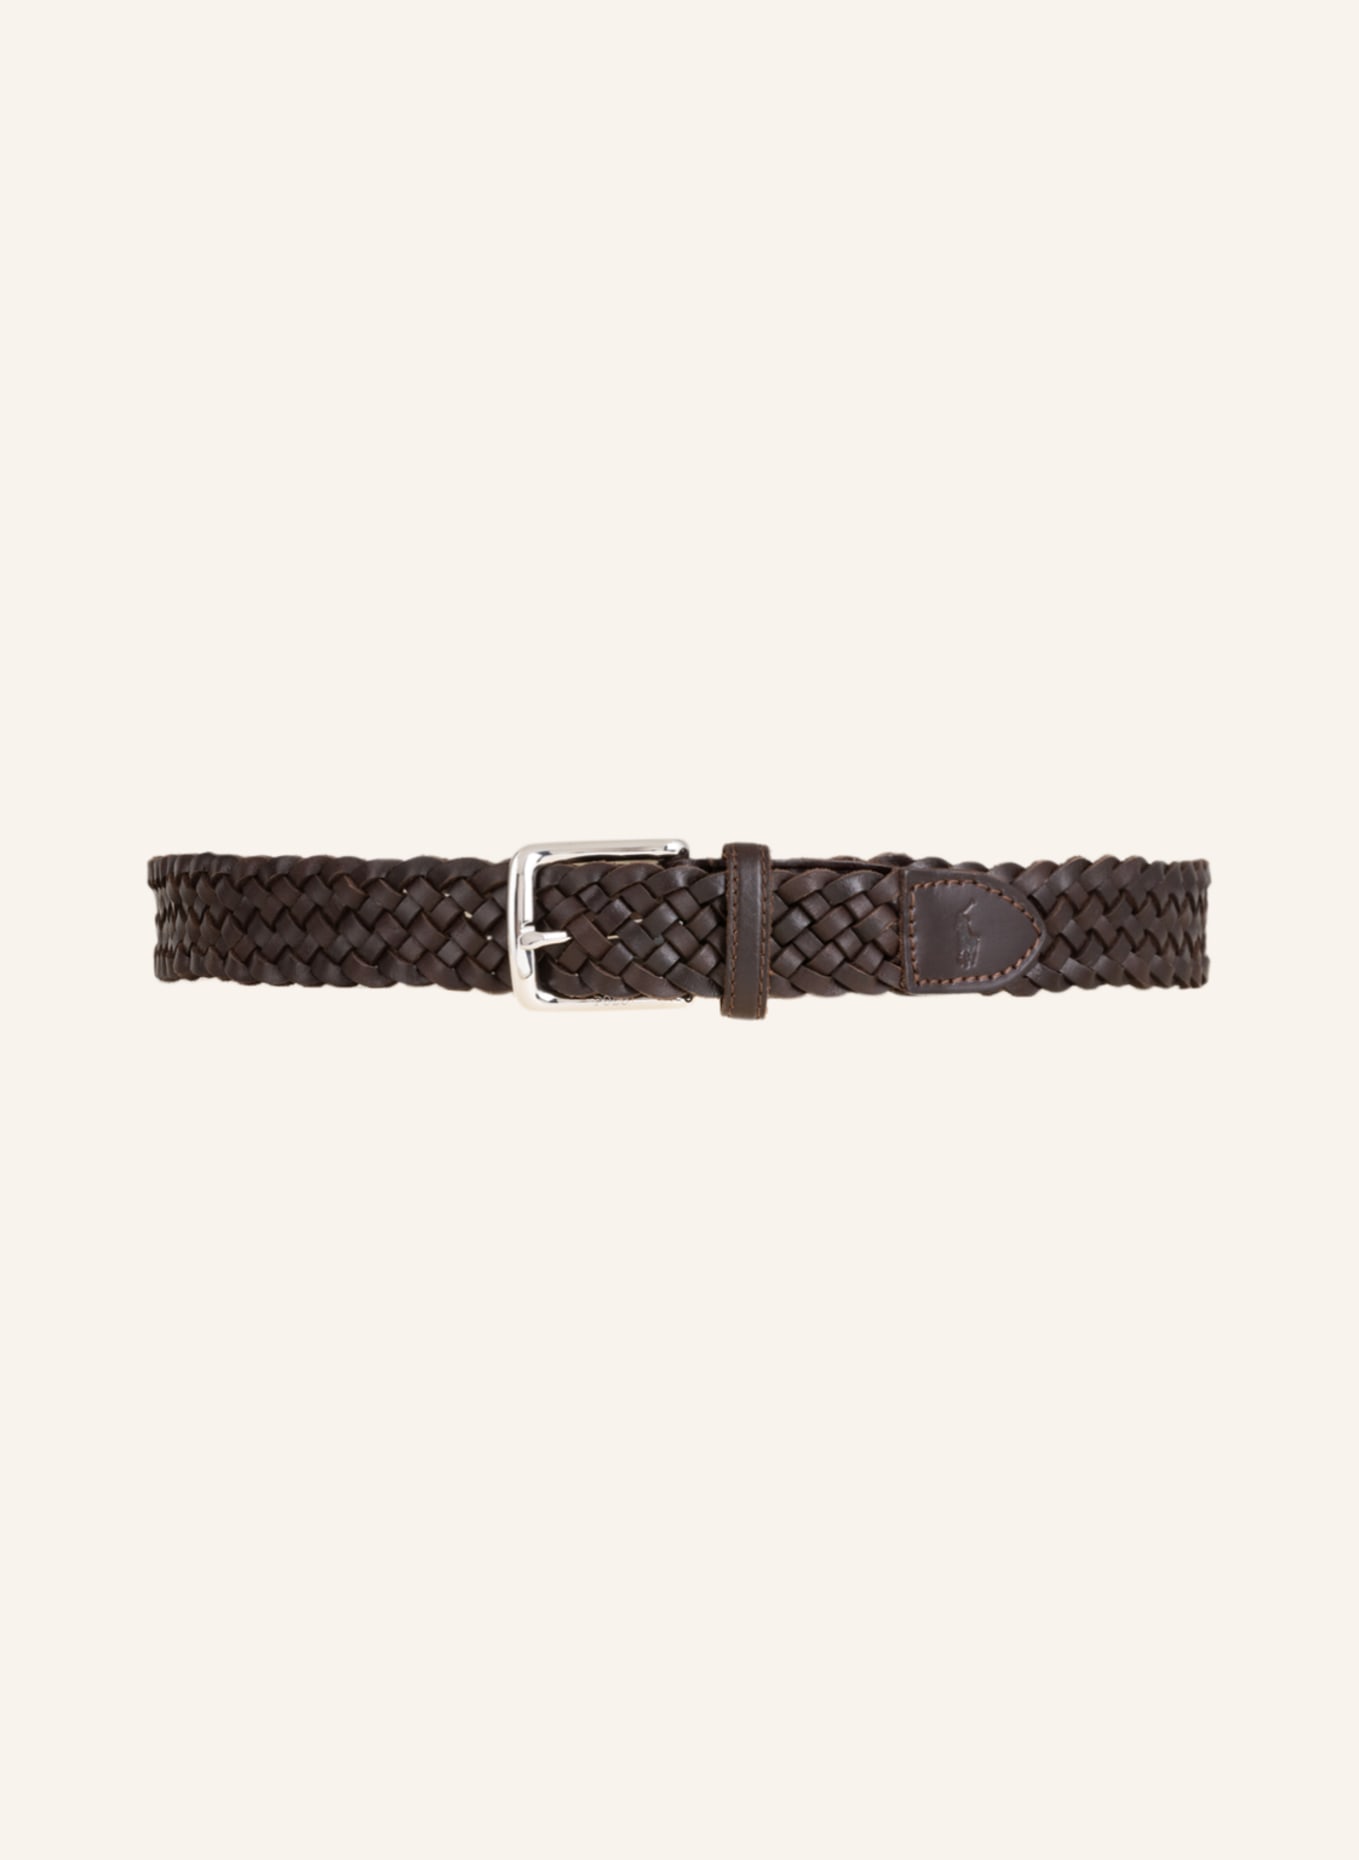 POLO RALPH LAUREN Braided belt made of leather, Color: DARK BROWN (Image 2)